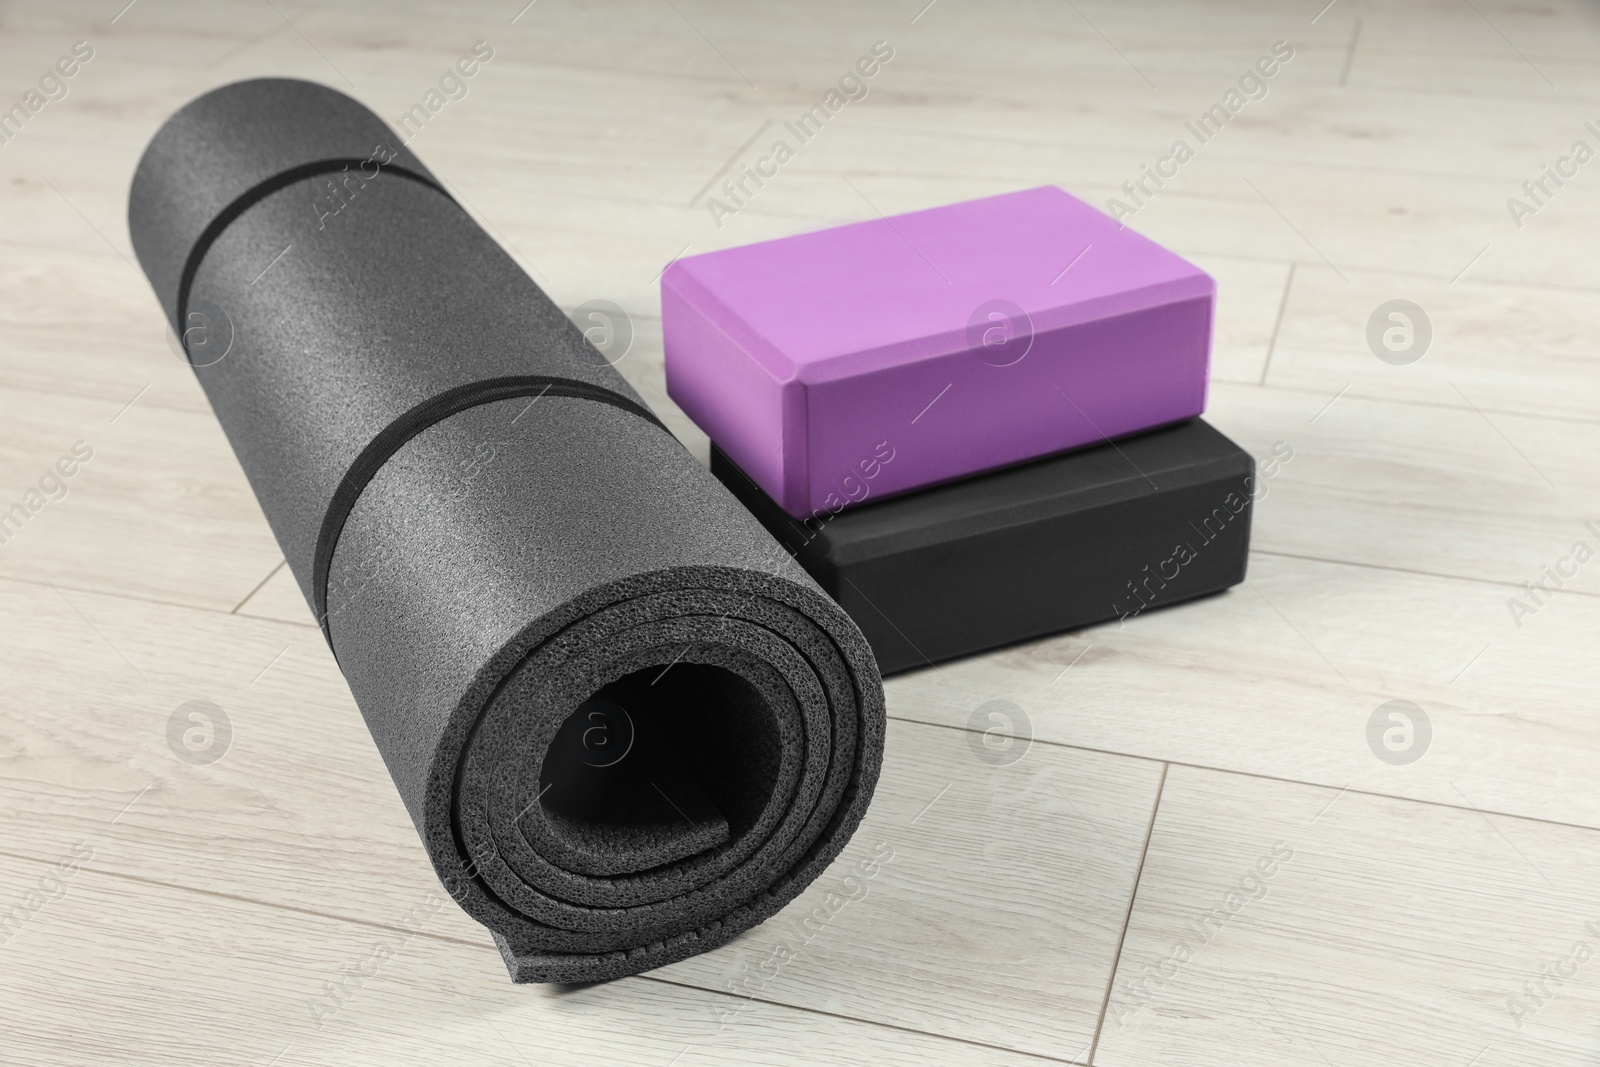 Photo of Exercise mat and yoga blocks on light wooden floor